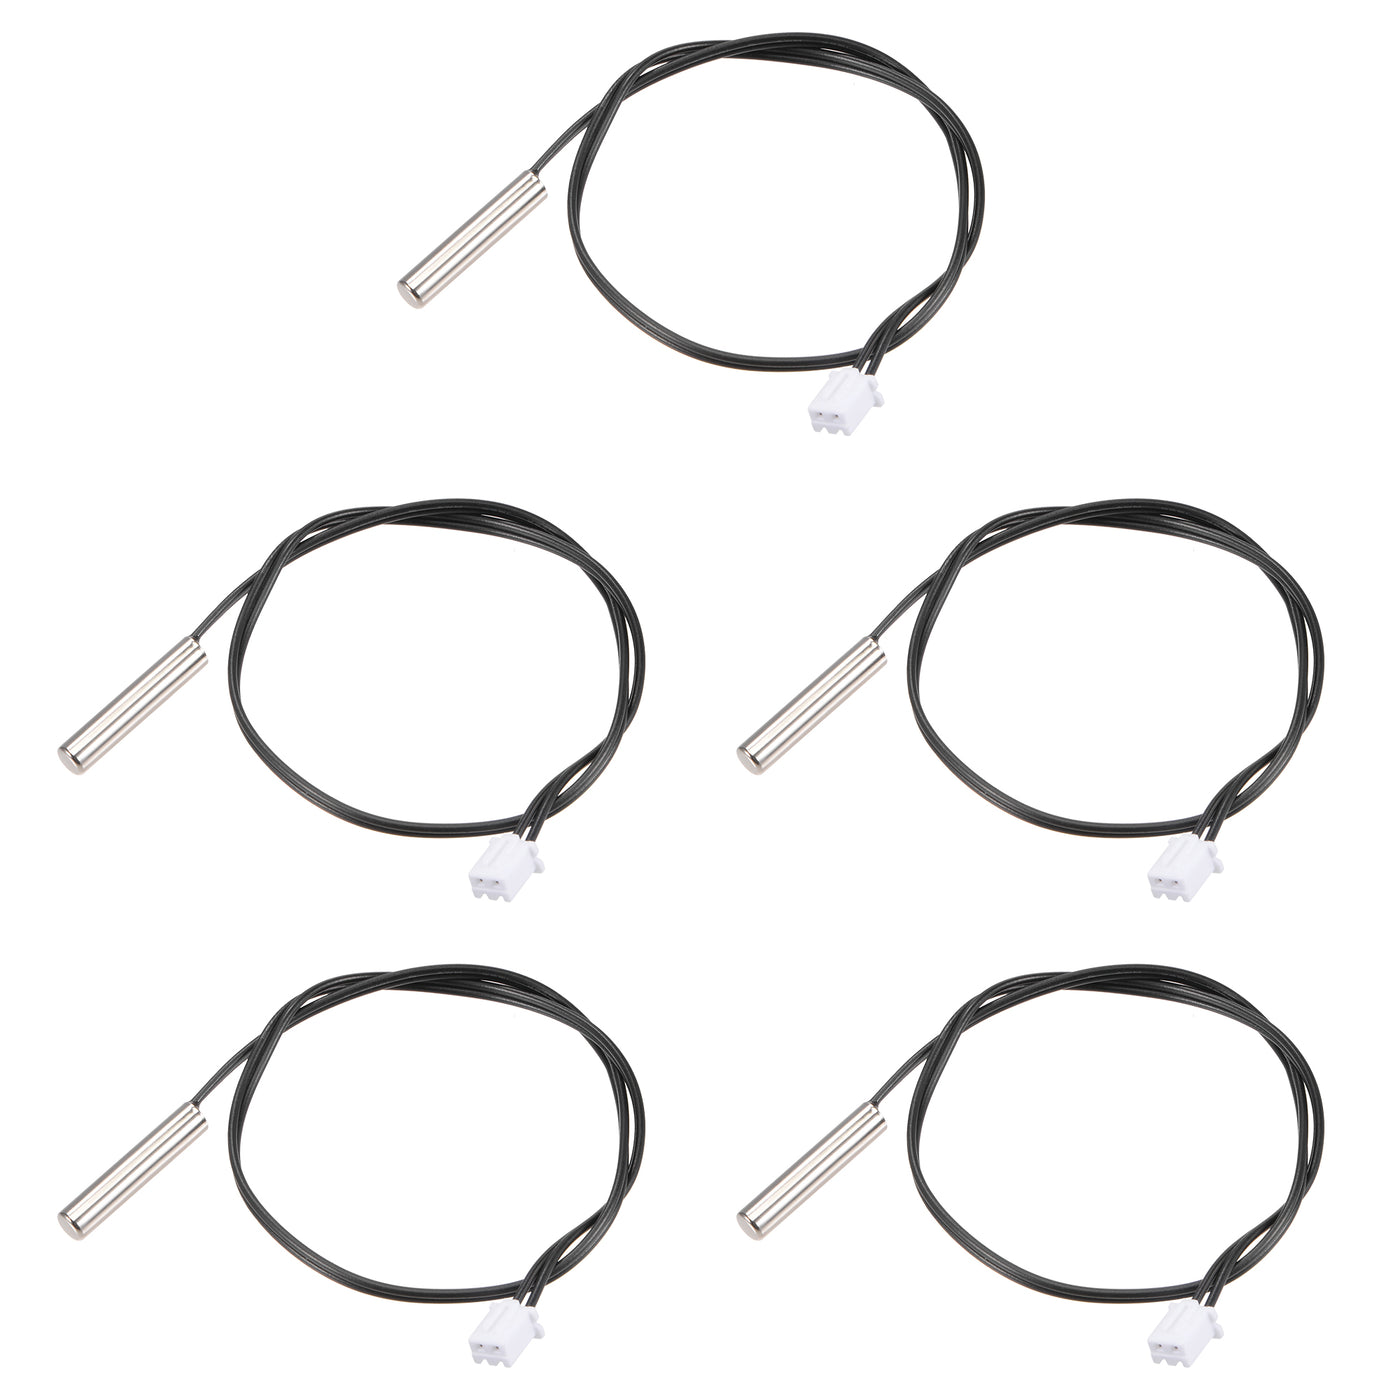 uxcell Uxcell 5pcs 50K Temperature Sensor Probe, Stainless Steel NTC Thermal Sensor Probe 30cm Digital Thermometer Extension Cable